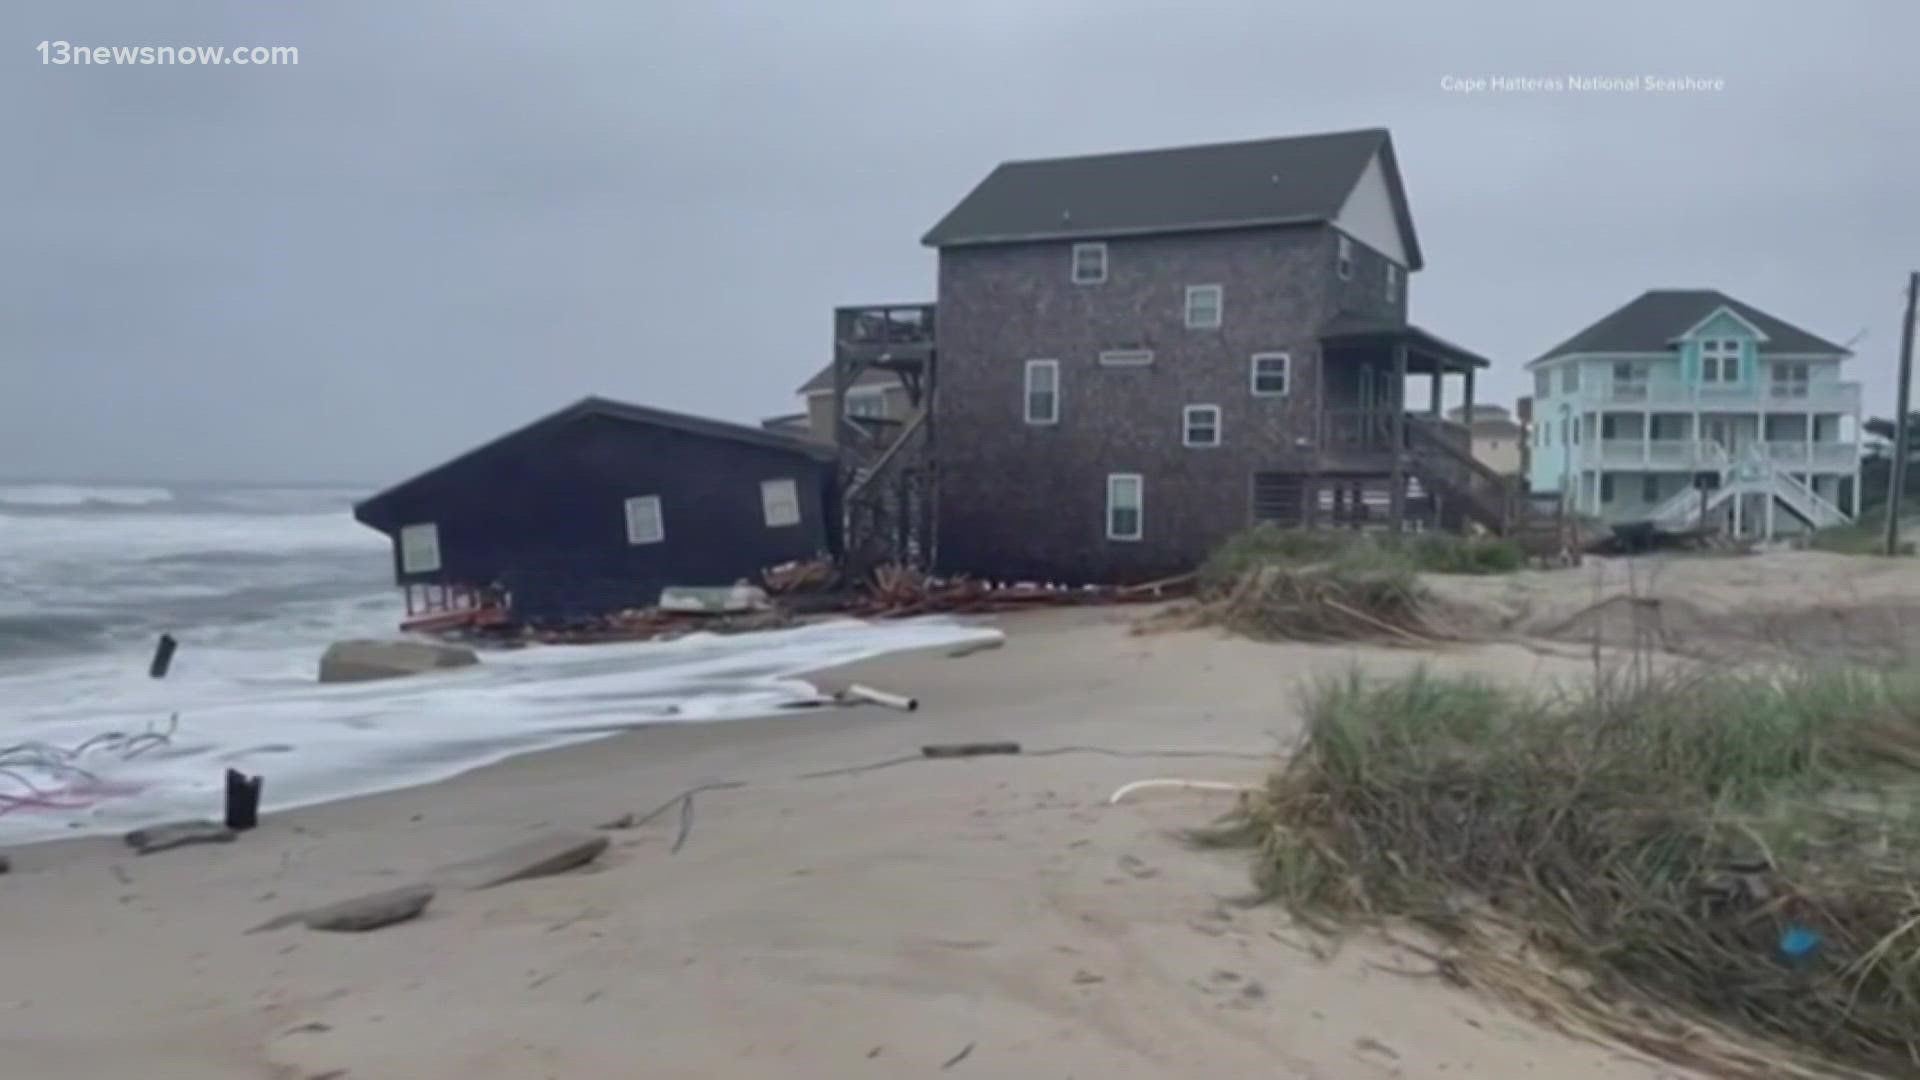 Several schools had remote learning on Tuesday, and two homes collapsed on the Cape Hatteras seashore.